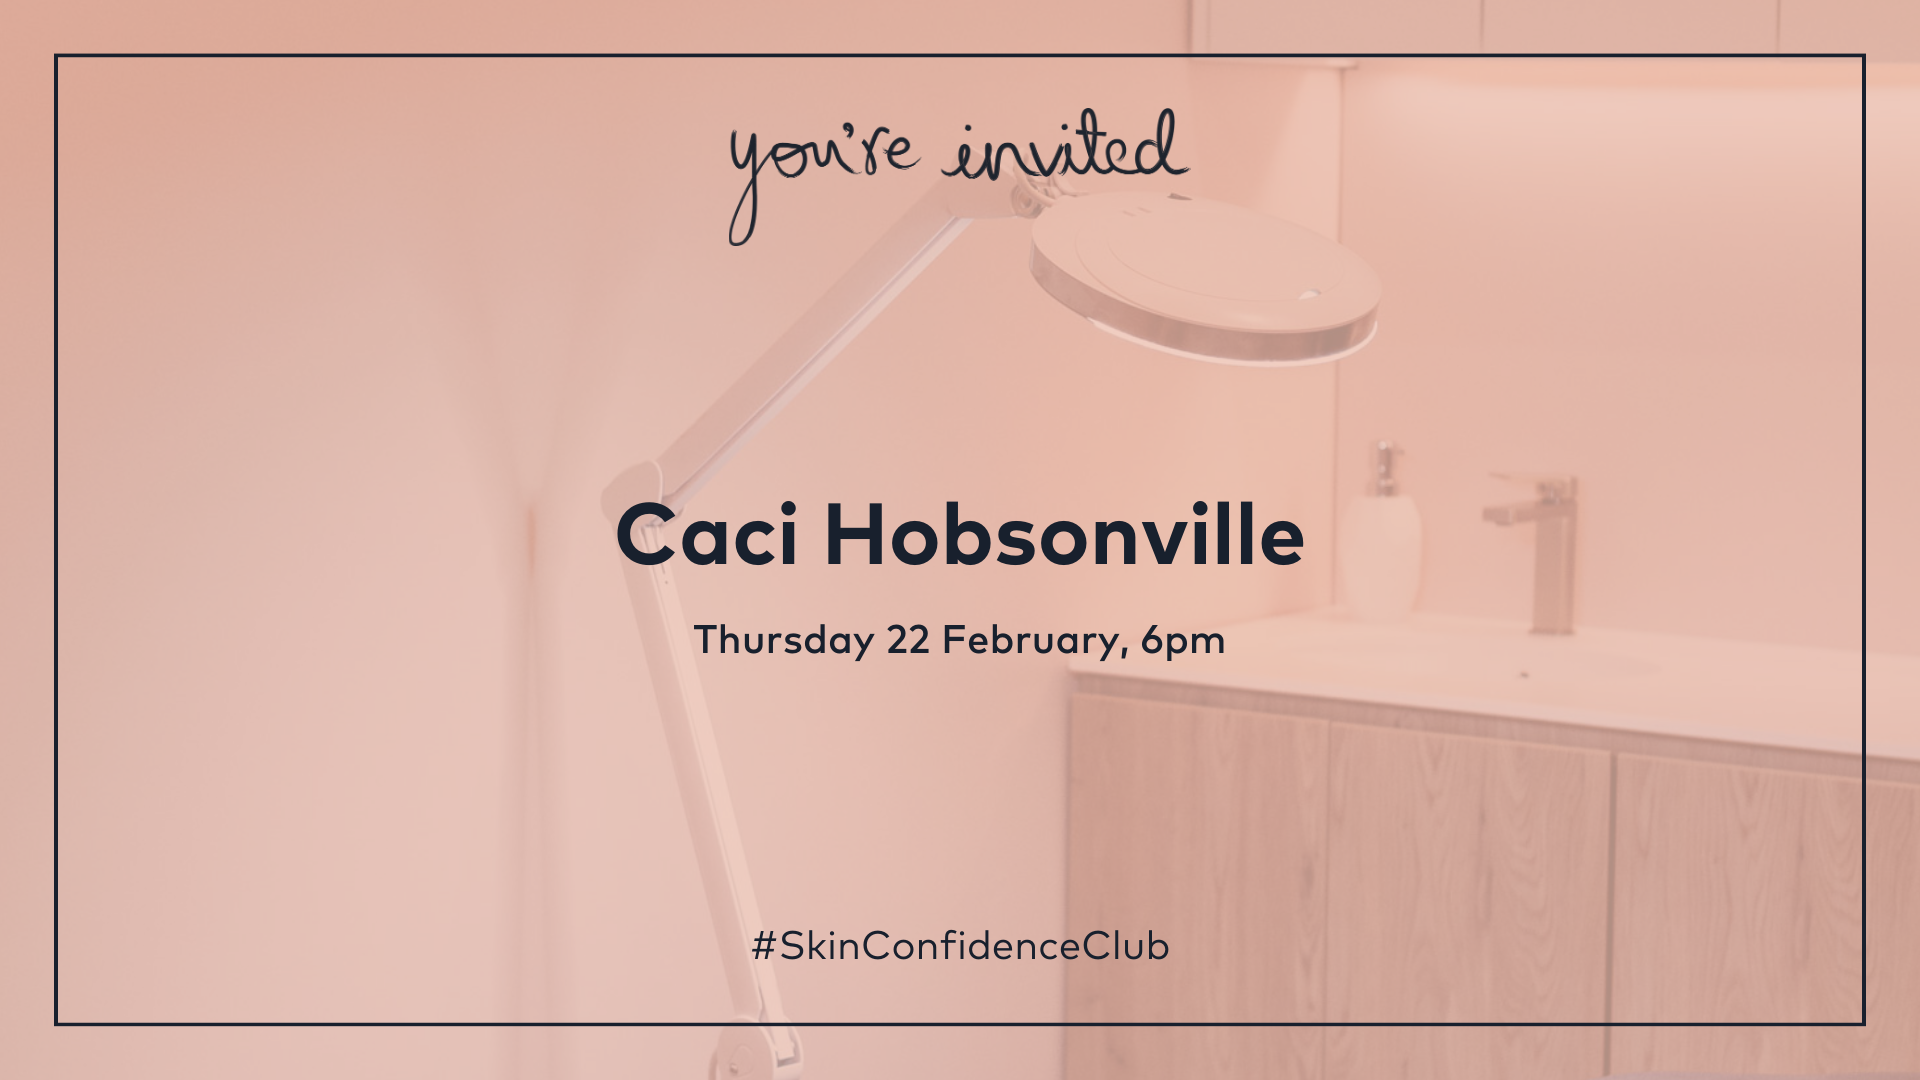 Be in the Know and Glow with Caci Hobsonville!